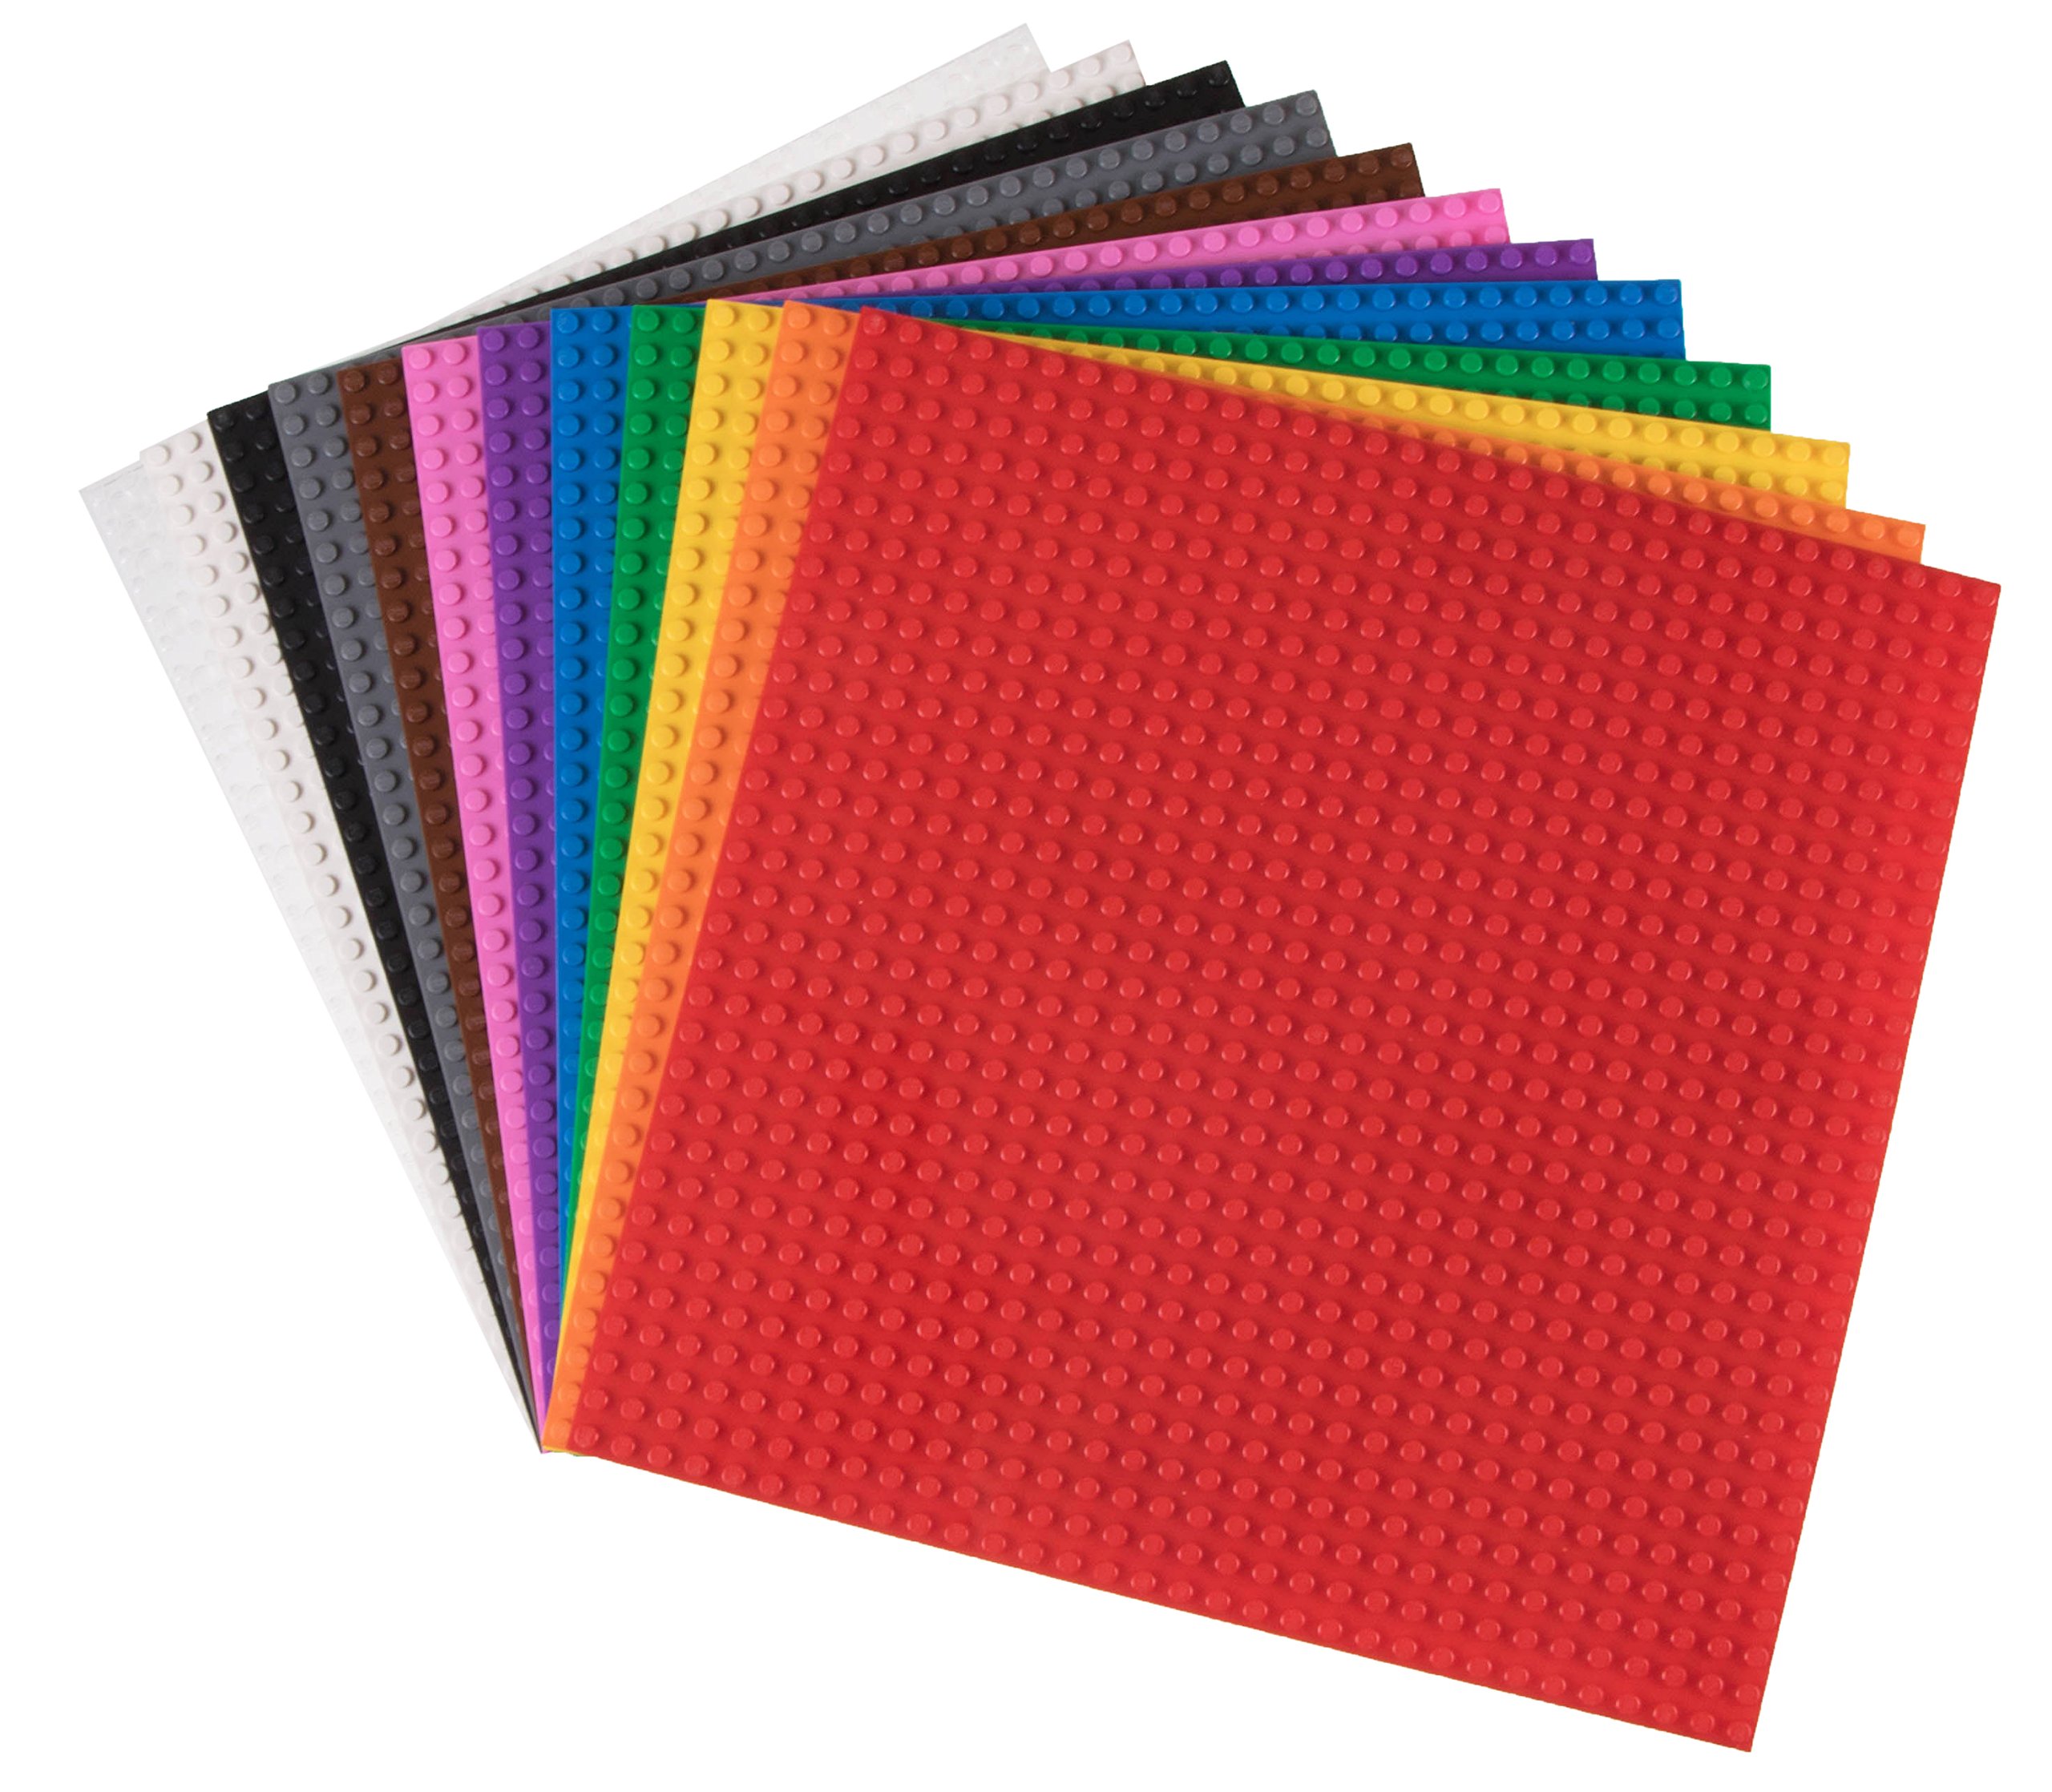 Book Cover Strictly Briks Classic Baseplates, for Building Bricks, Bases for Tables, Mats, and More, 100% Compatible with All Major Brands, Rainbow Colors, 12 Pack, 10x10 Inches